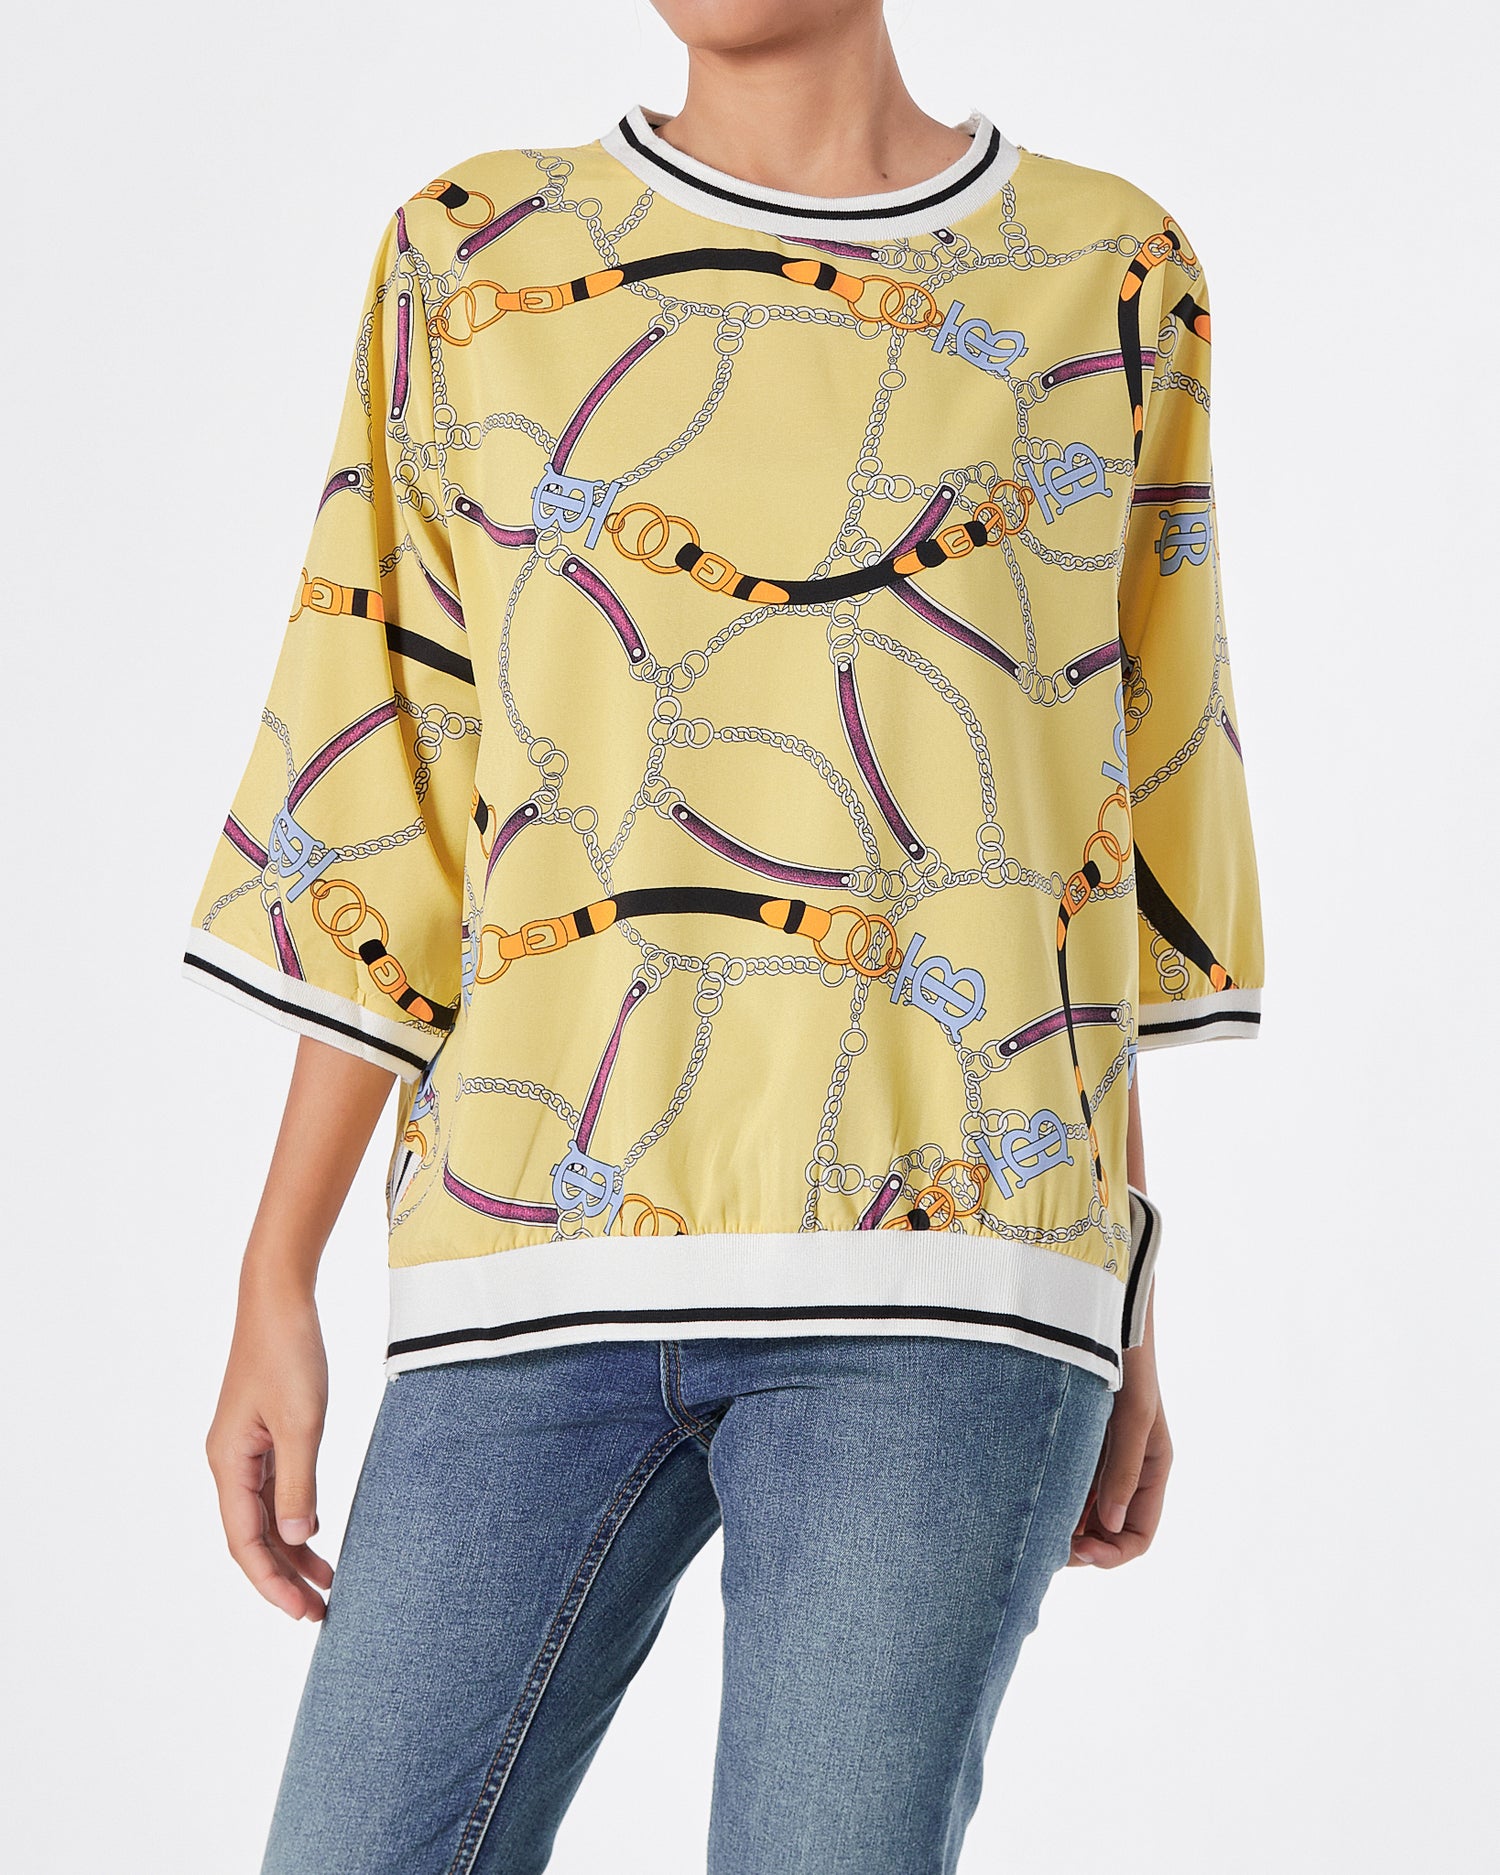 Chain Over Printed Lady Yellow T-Shirt 15.90